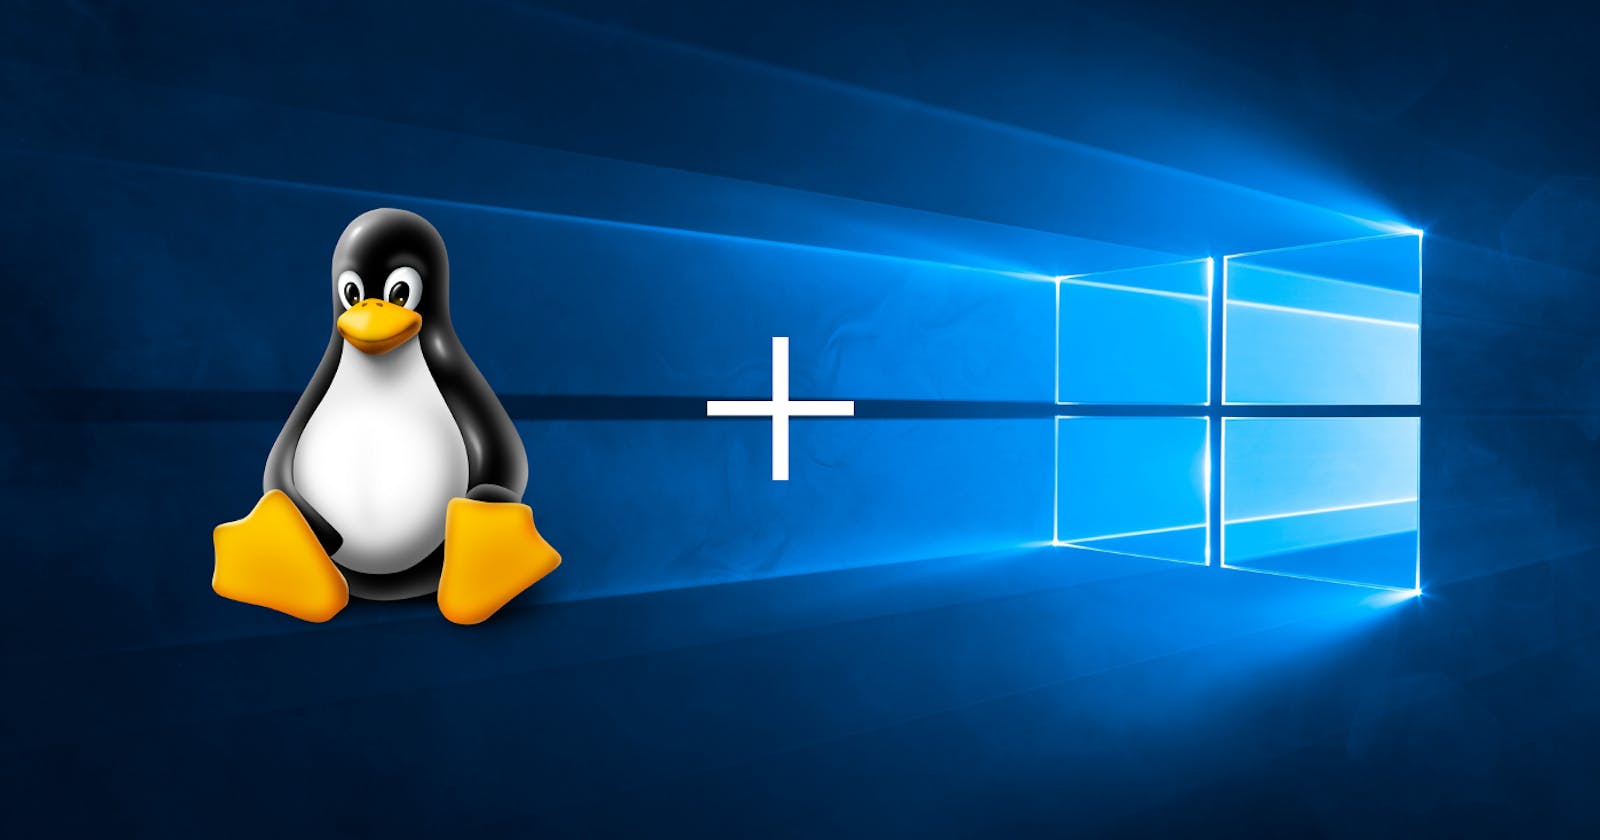 Linux support in Windows 10